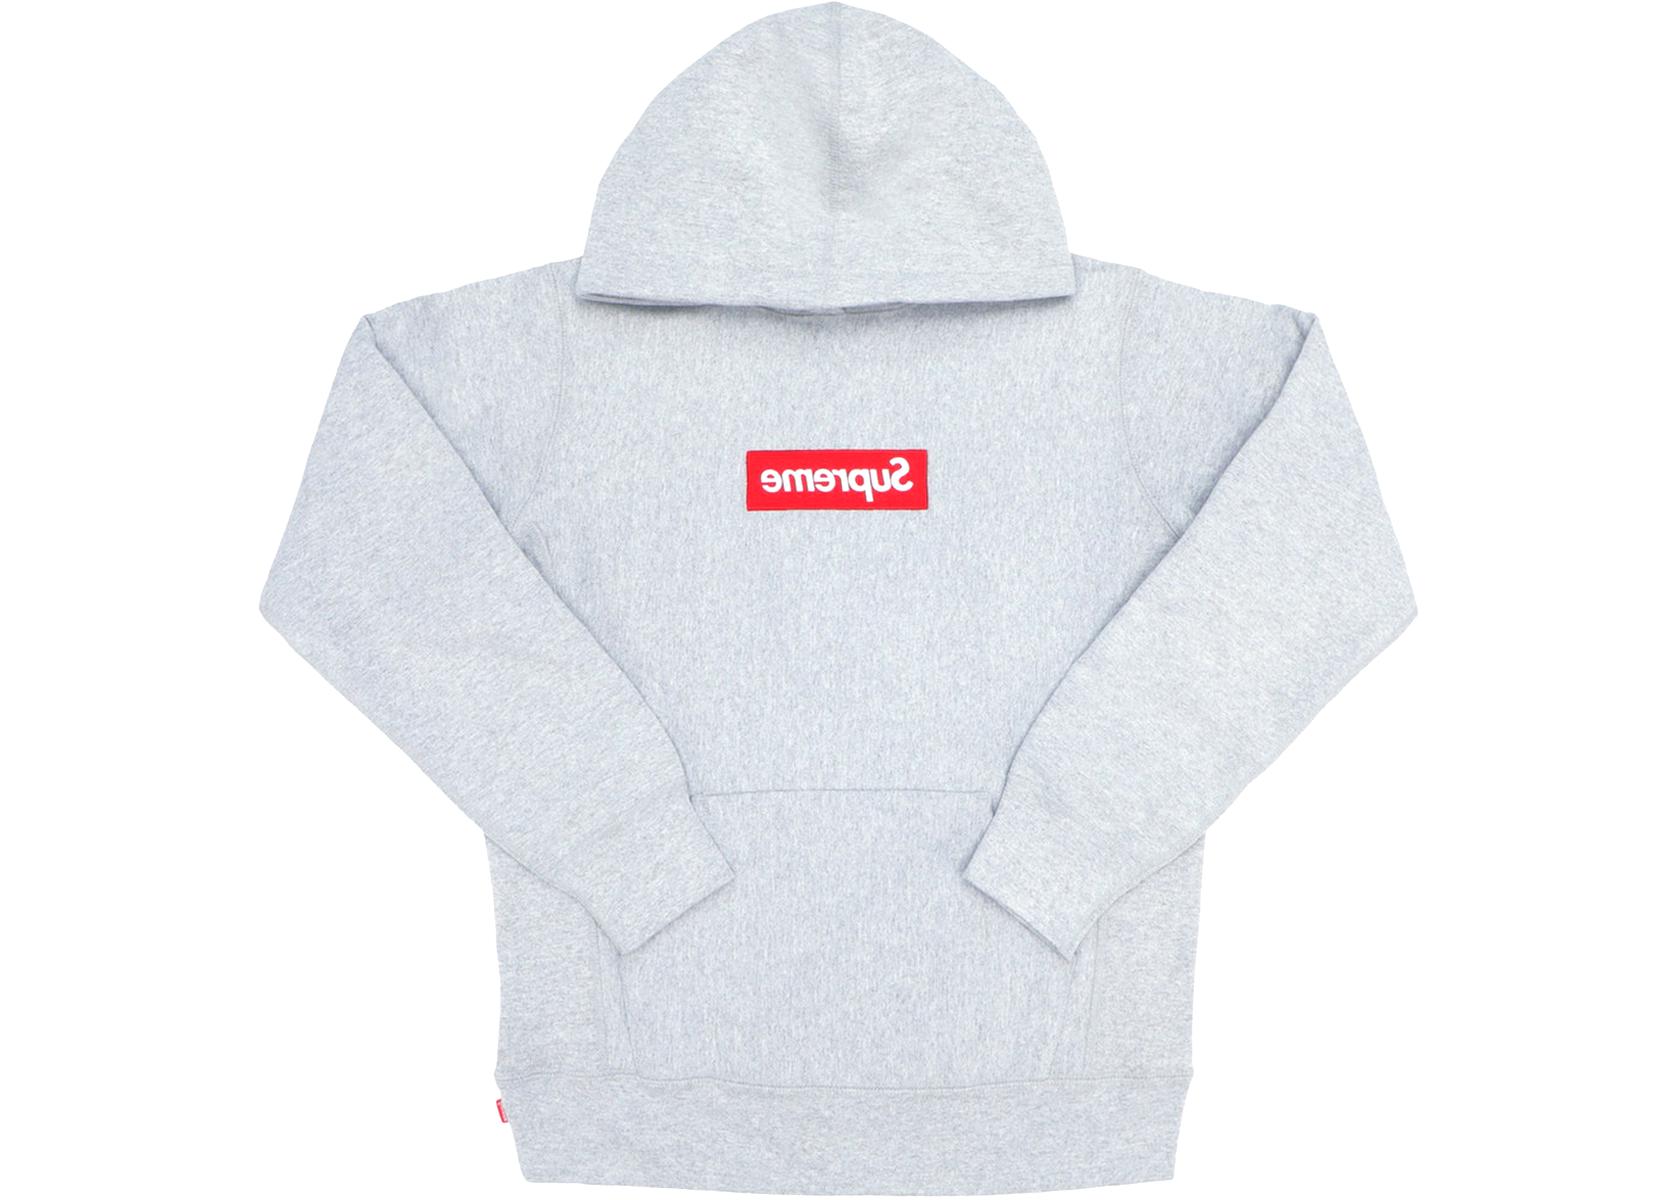 Supreme Box Logo Hoodie for sale in UK | View 52 bargains